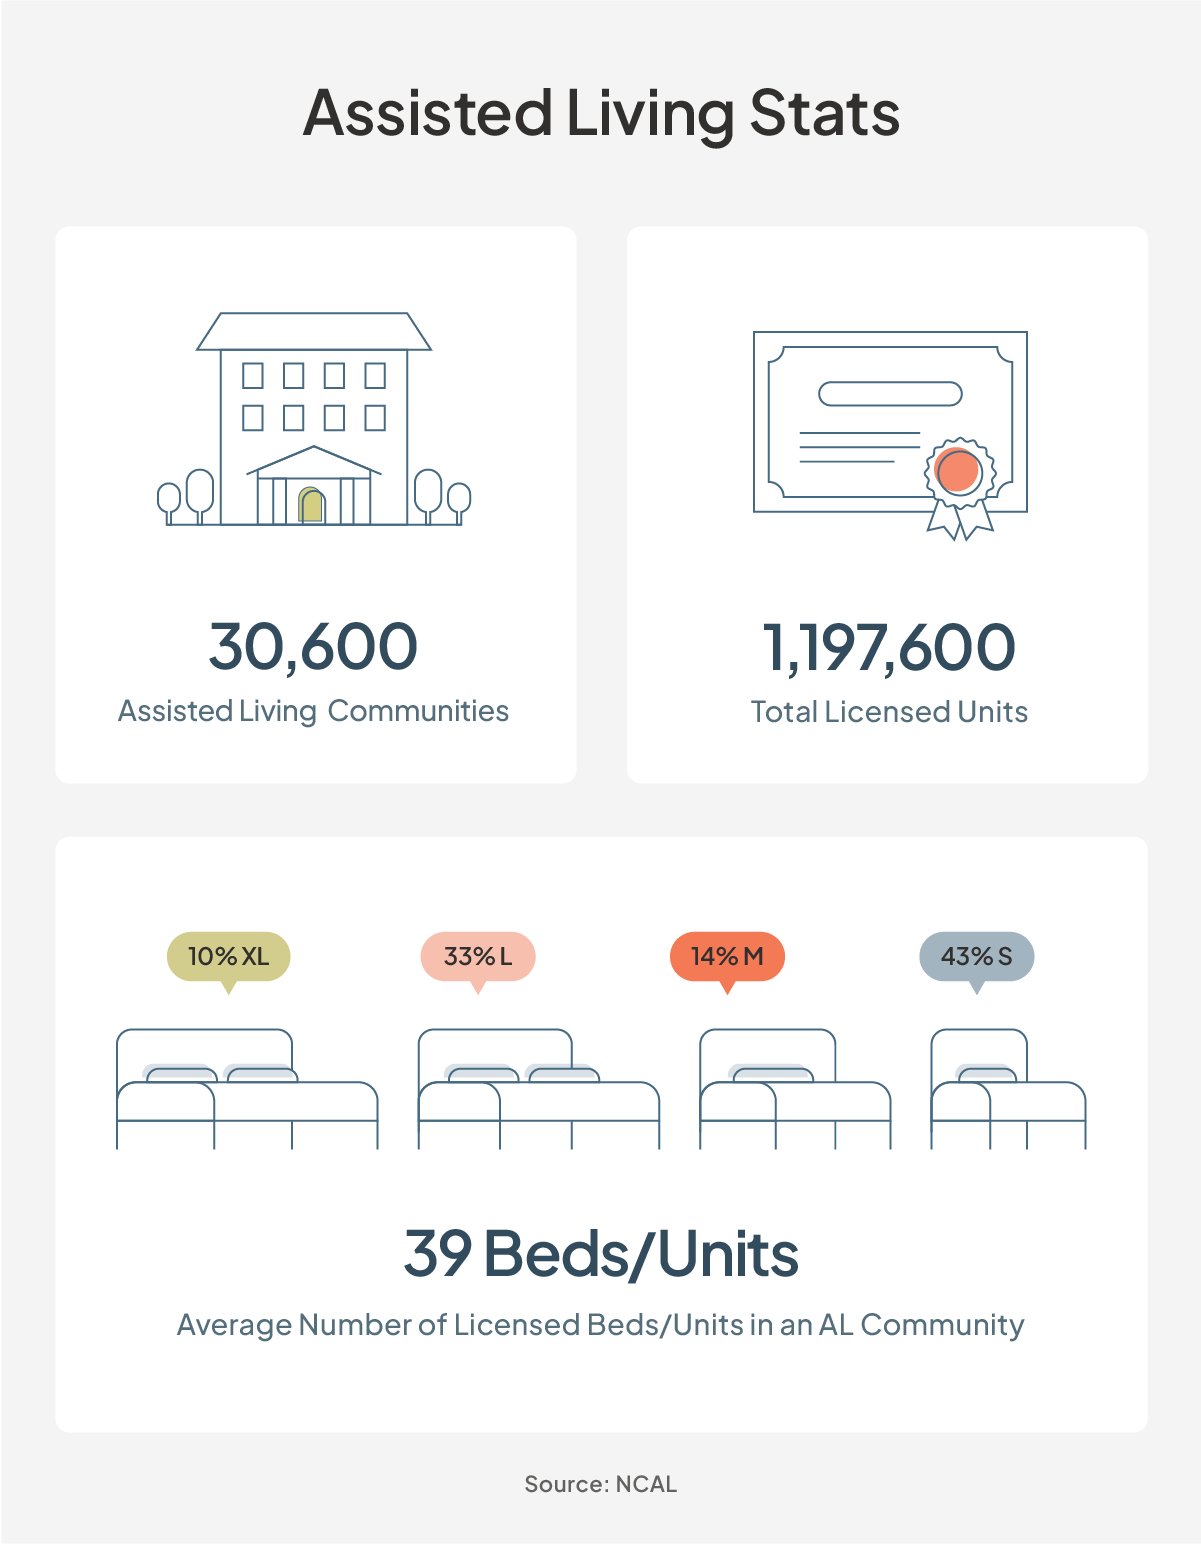 Graphic showing the current amount of assisted living communities, licensed units and beds are in the U.S.